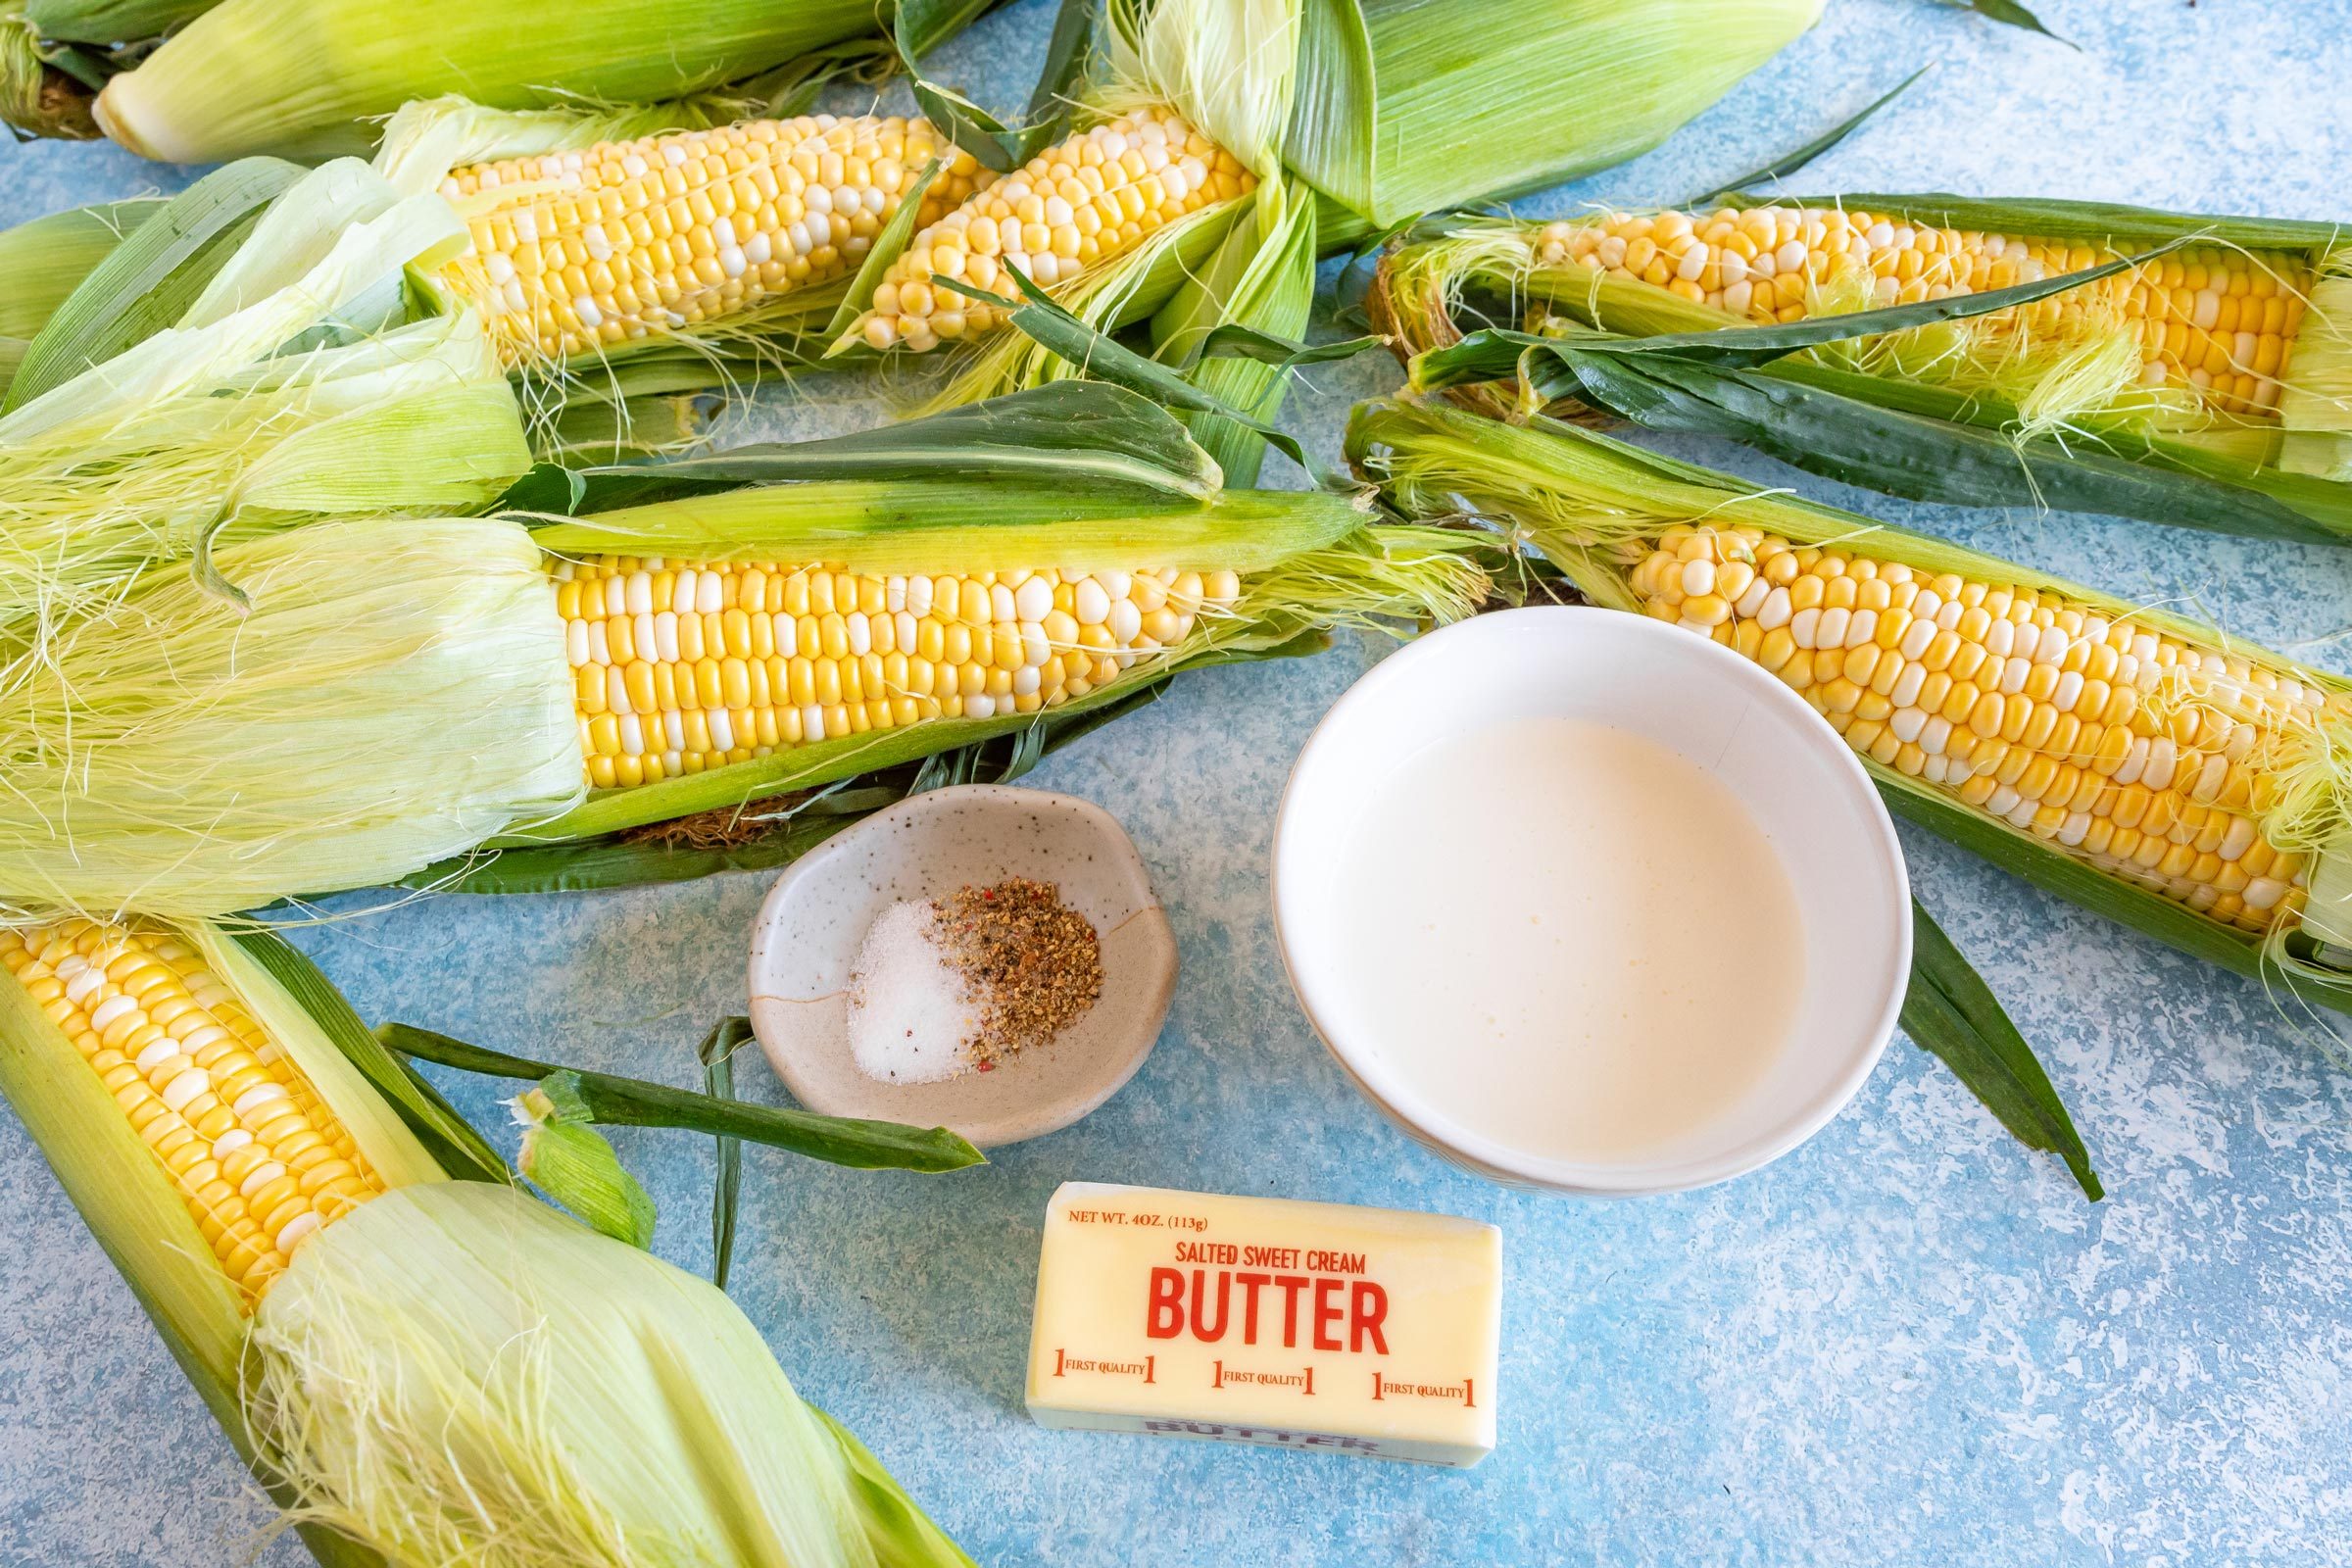 corn on the cob, butter, a dish of spices and a bowl of milk on a blue countertop